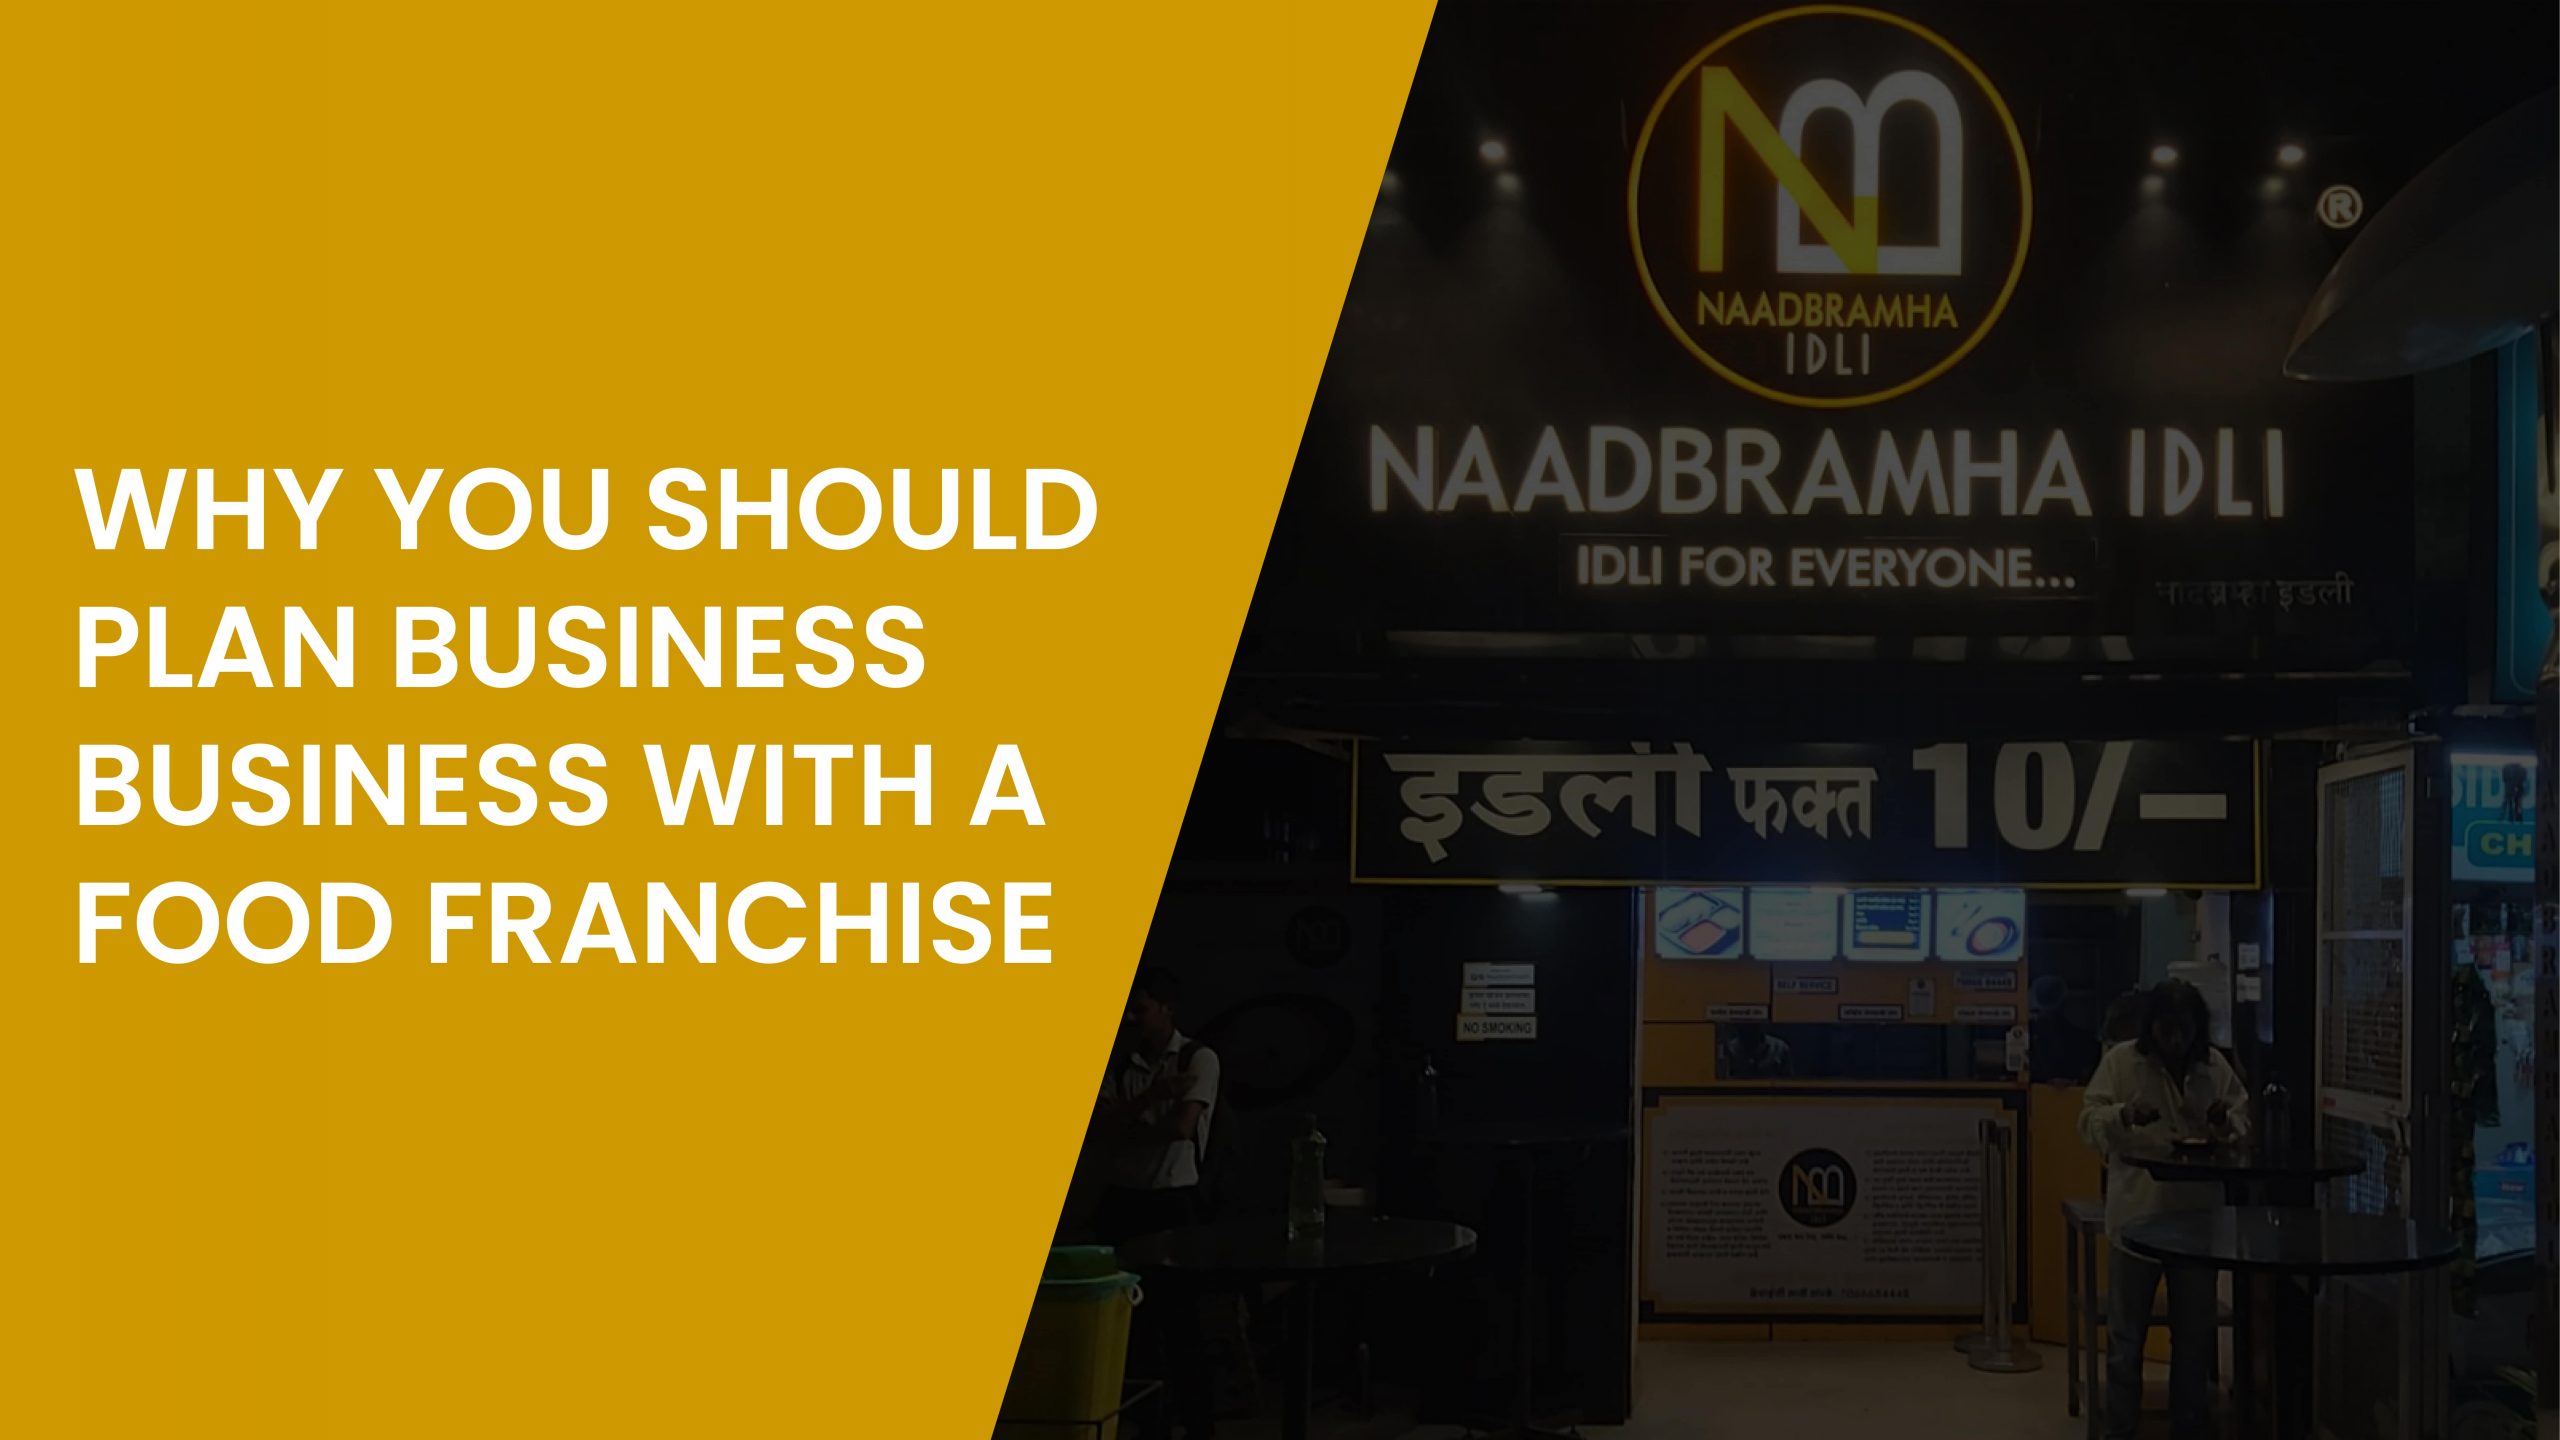 Why plan a business with a food franchise in Mumbai?